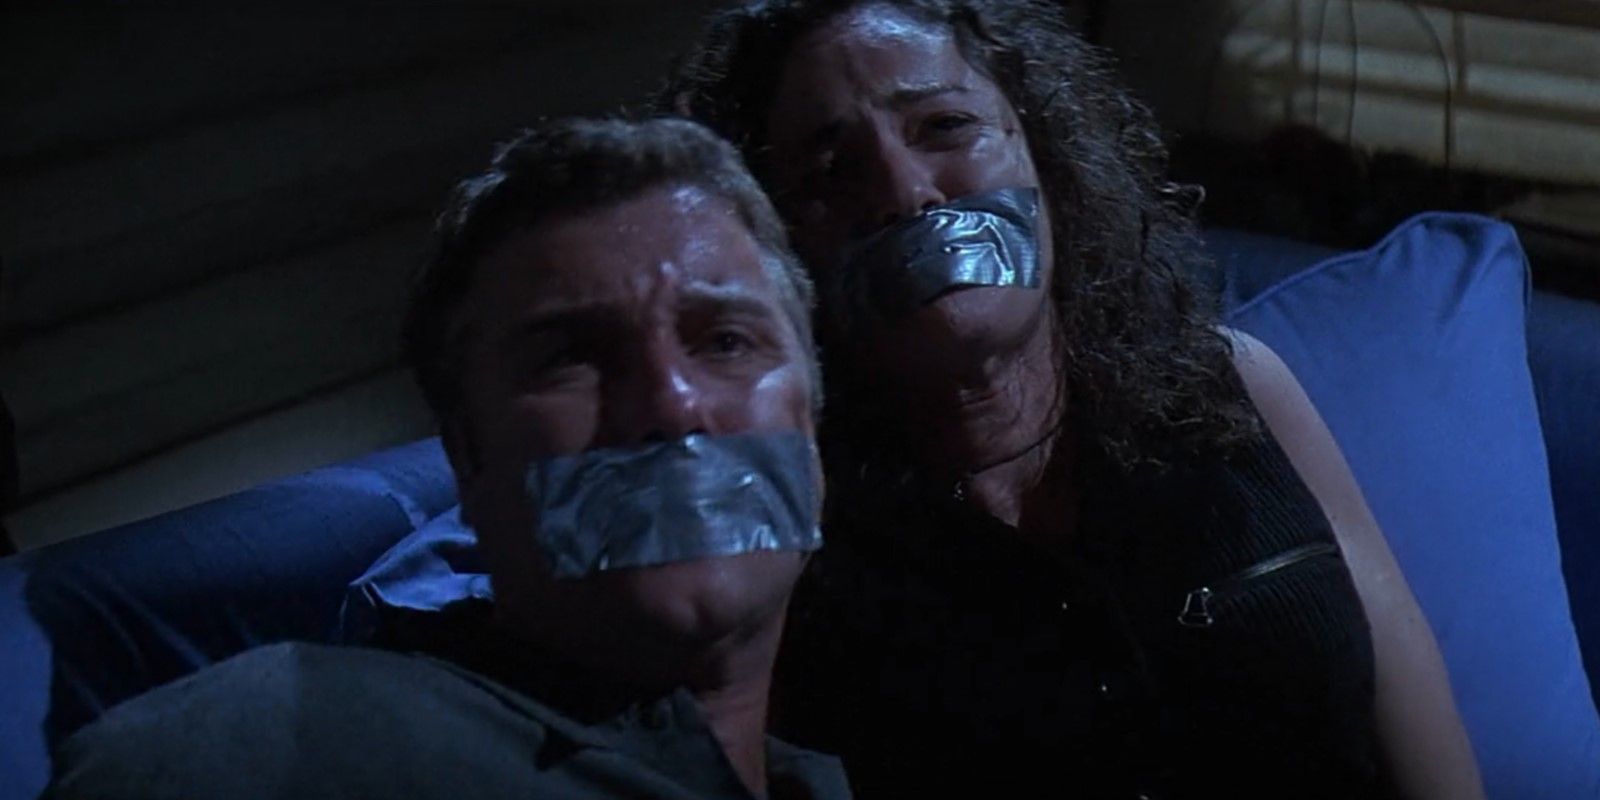 Steve (William Petersen) and Laura (Amy Brenneman) with duct tape over their mouths in Fear